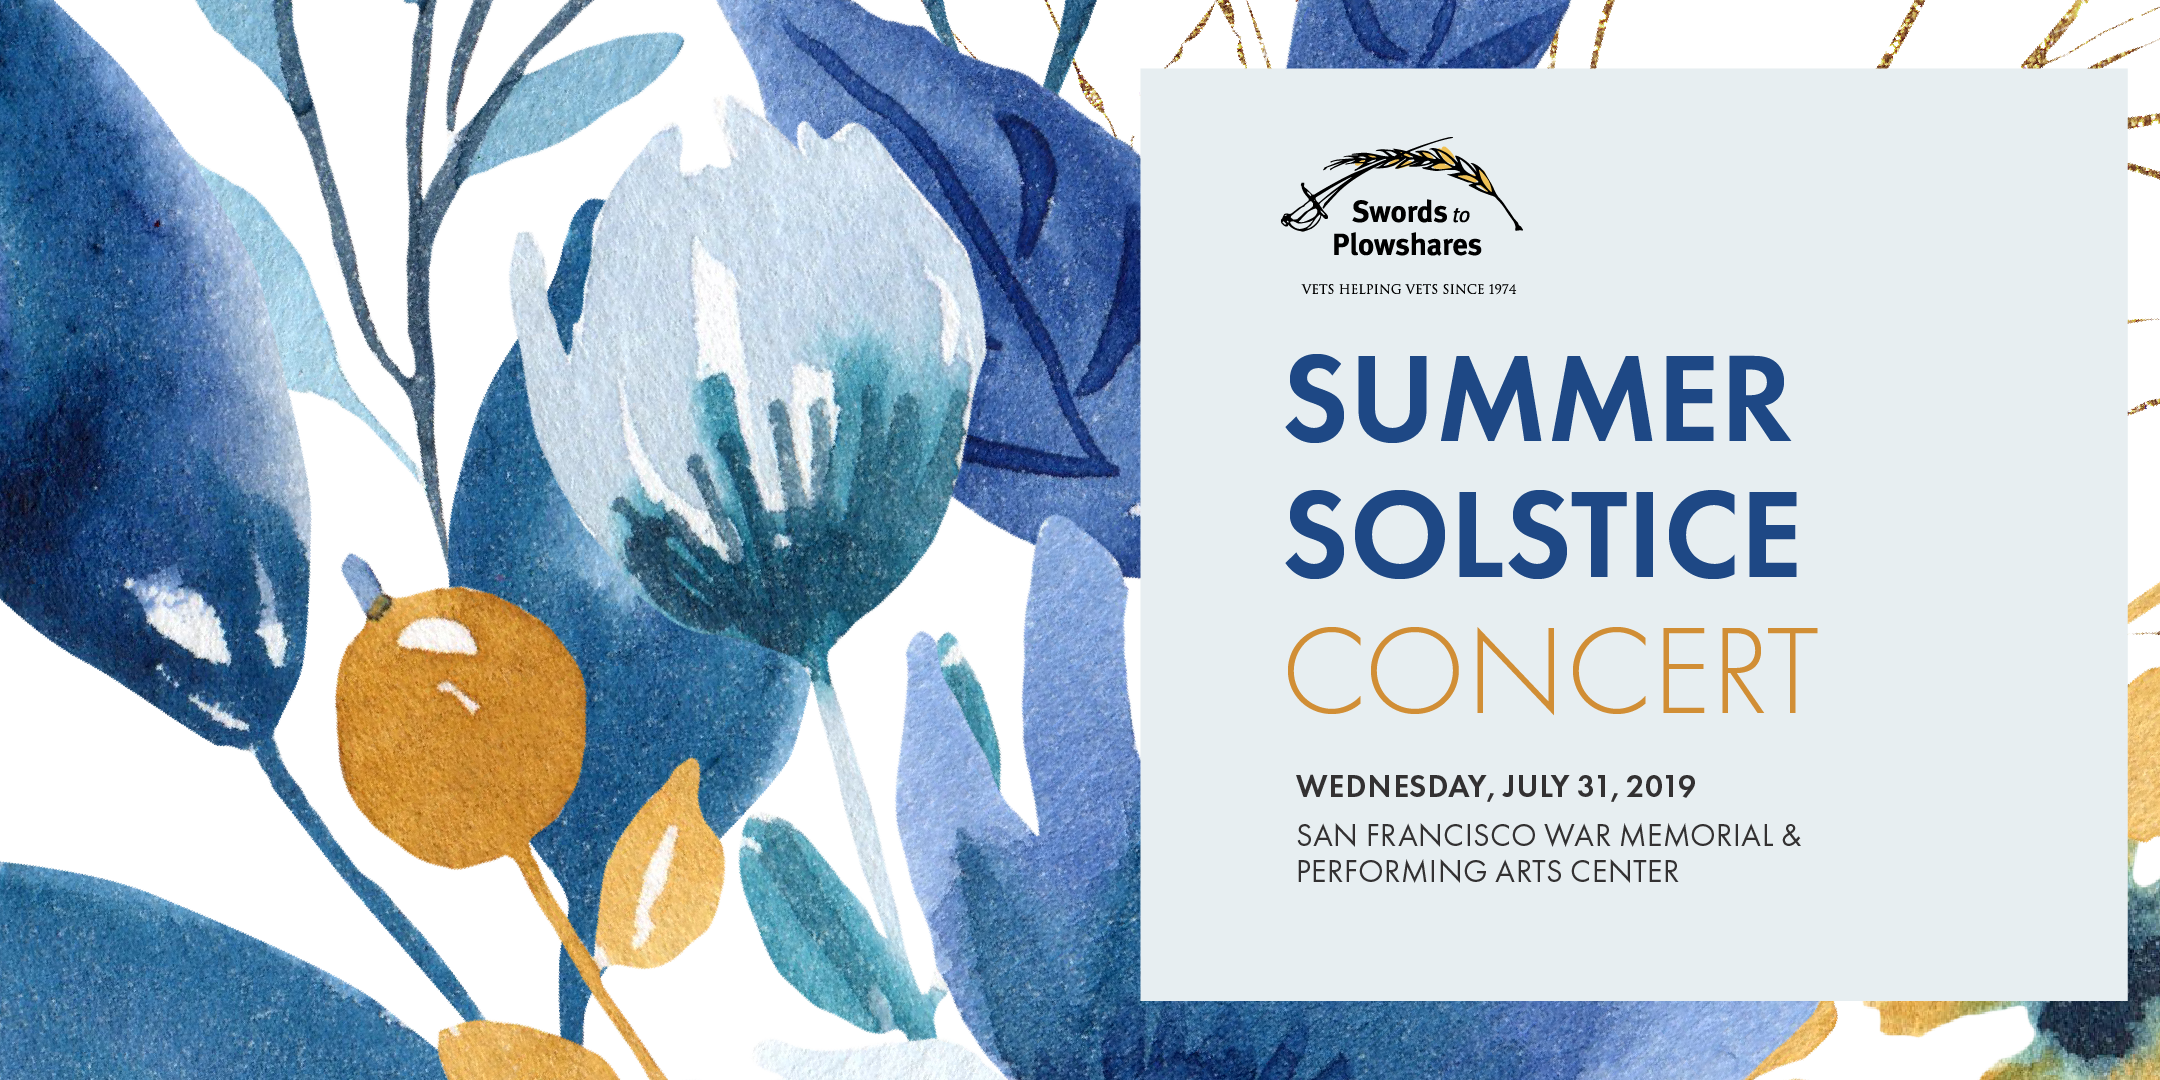 Summer Solstice Symphony Concert
Wednesday, July 31, 2019; 6:00 PM-8:45 PM
6:00 PM - Reception
7:15 PM – Performance
Wilsey Center for Opera, 4th Floor
401 Van Ness Ave, San Francisco, CA 94102
